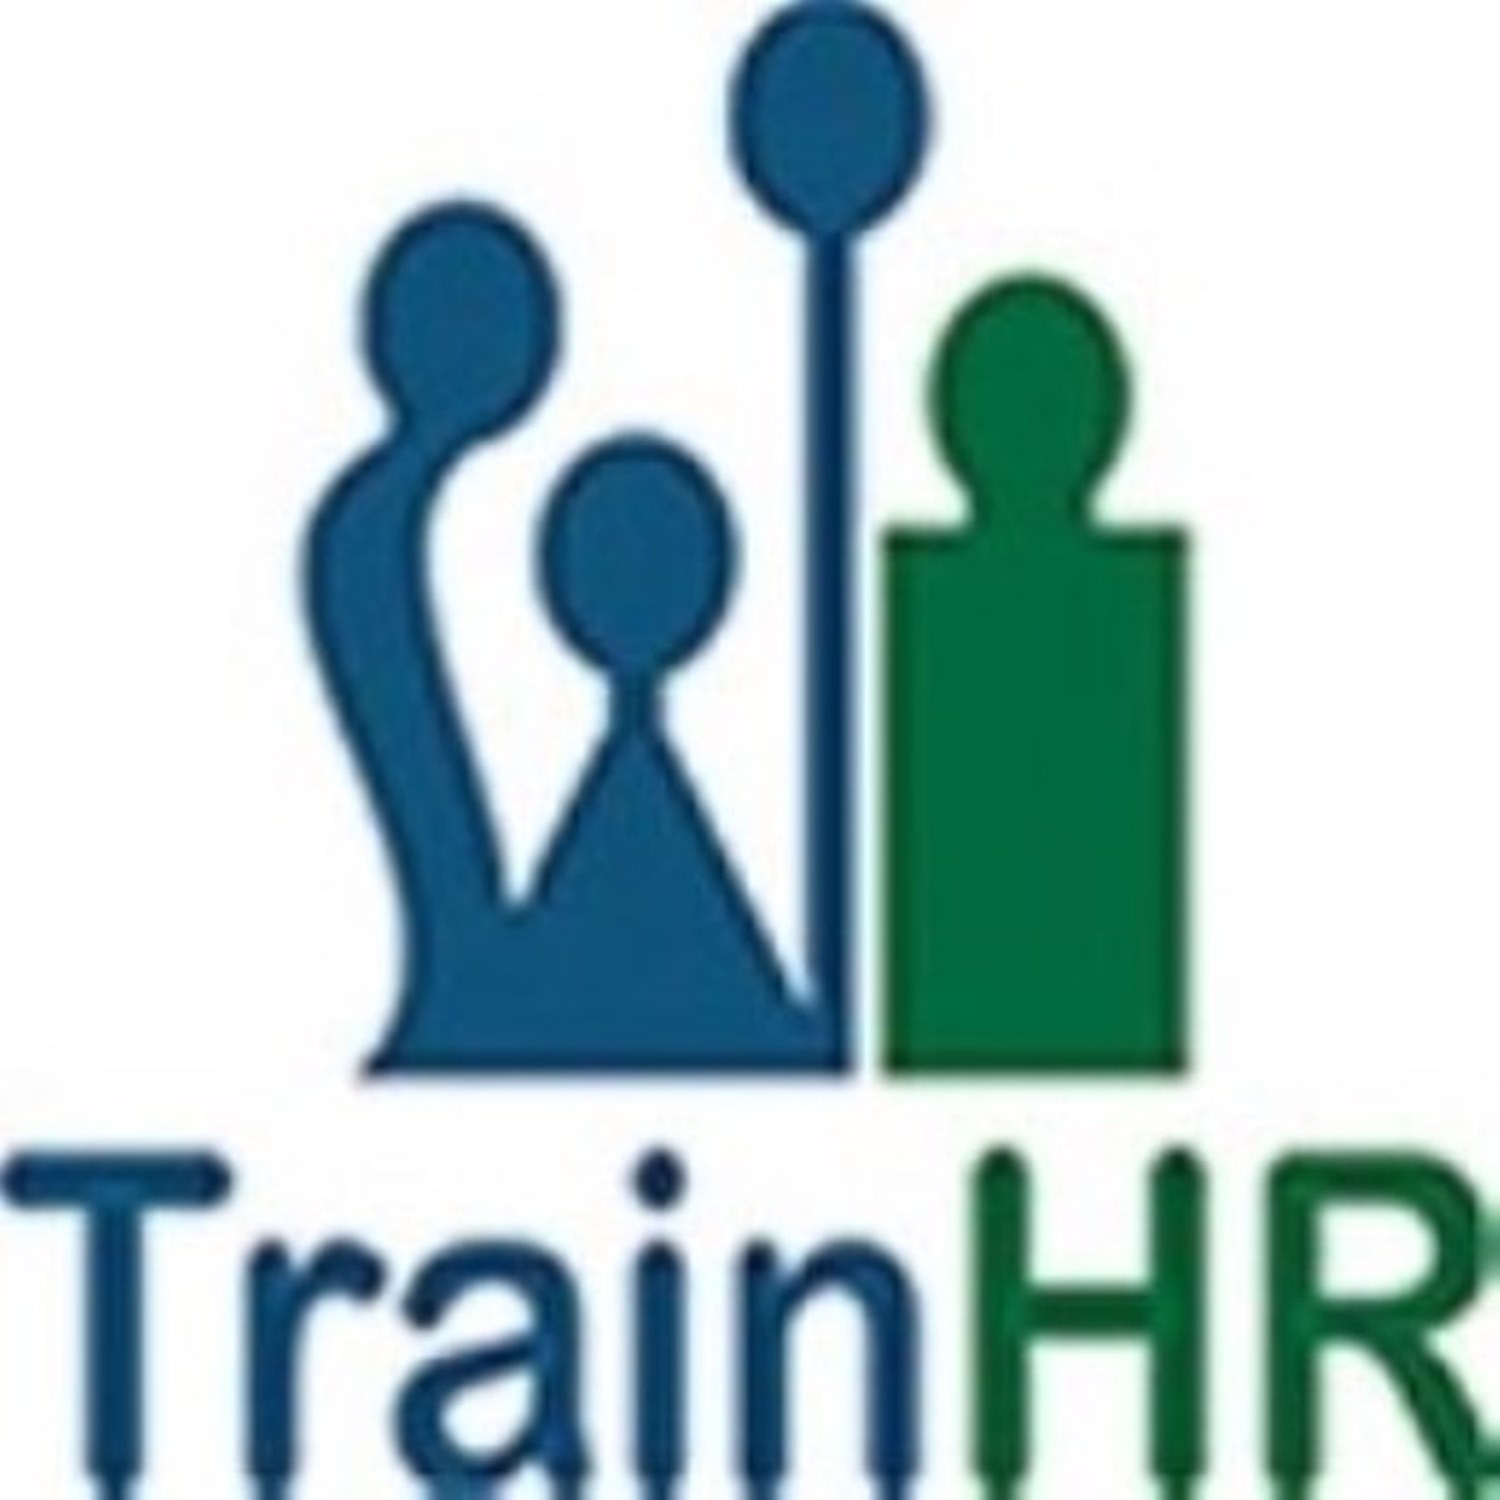 Overview:
Join us to learn about current best practices and how to organize the new hire experience to build commitment, confidence and competence. 
http://www.trainhr.com/control/w_product/~product_id=701579LIVE/?channel=mailer&camp=webinar&AdGroup=allconferencealerts_jan_2017_SEO